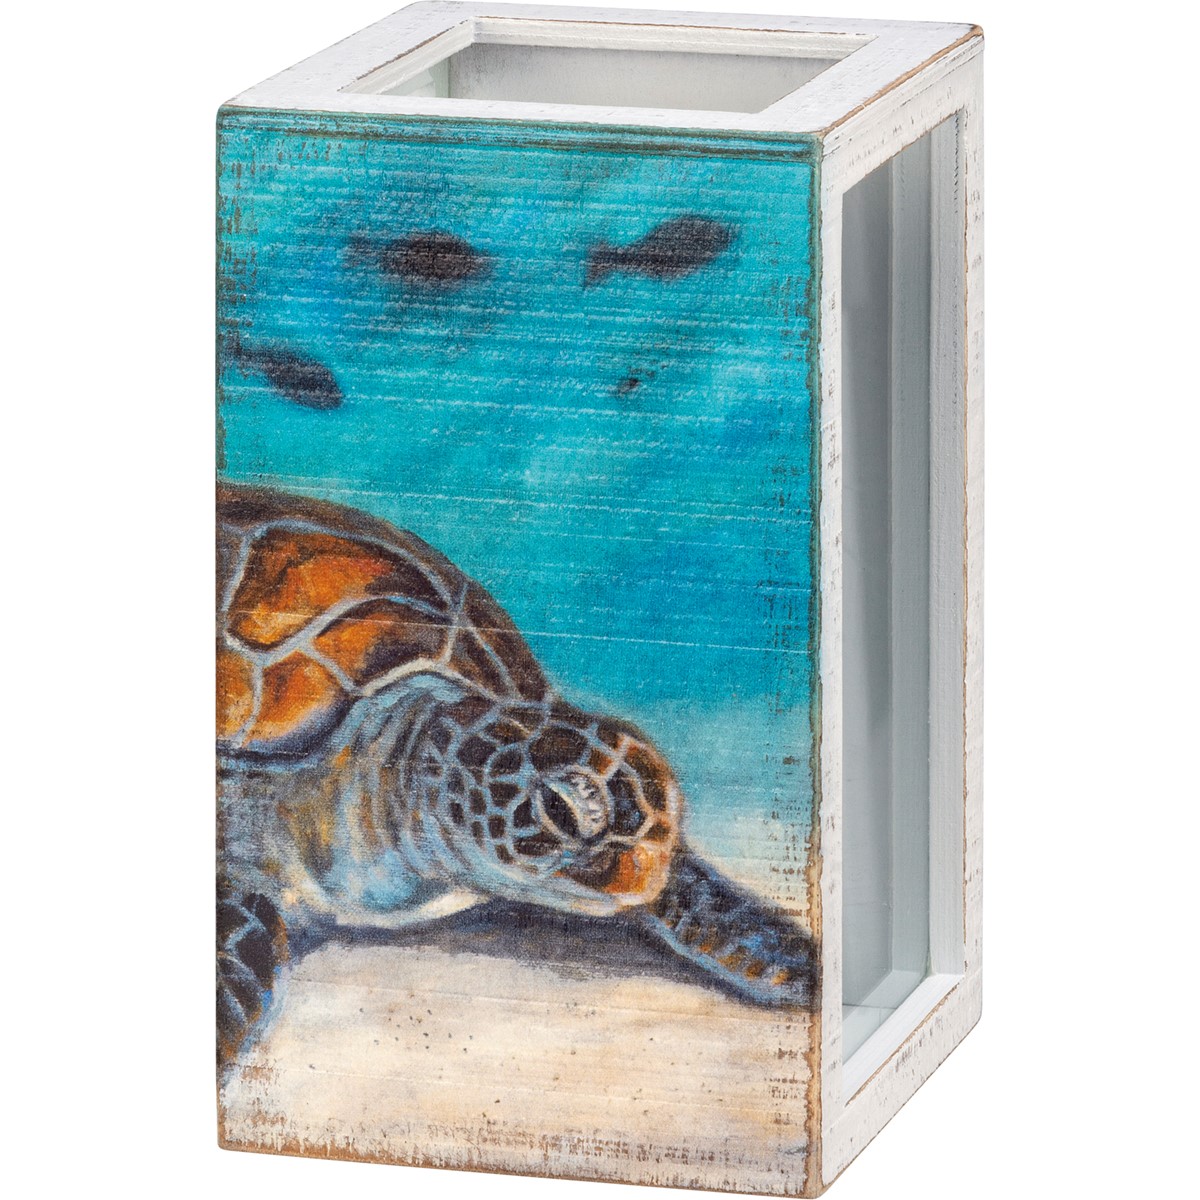 Shell Holder - Sea Turtle - 4.25" x 7.25" x 4.25" - Wood, Paper, Glass